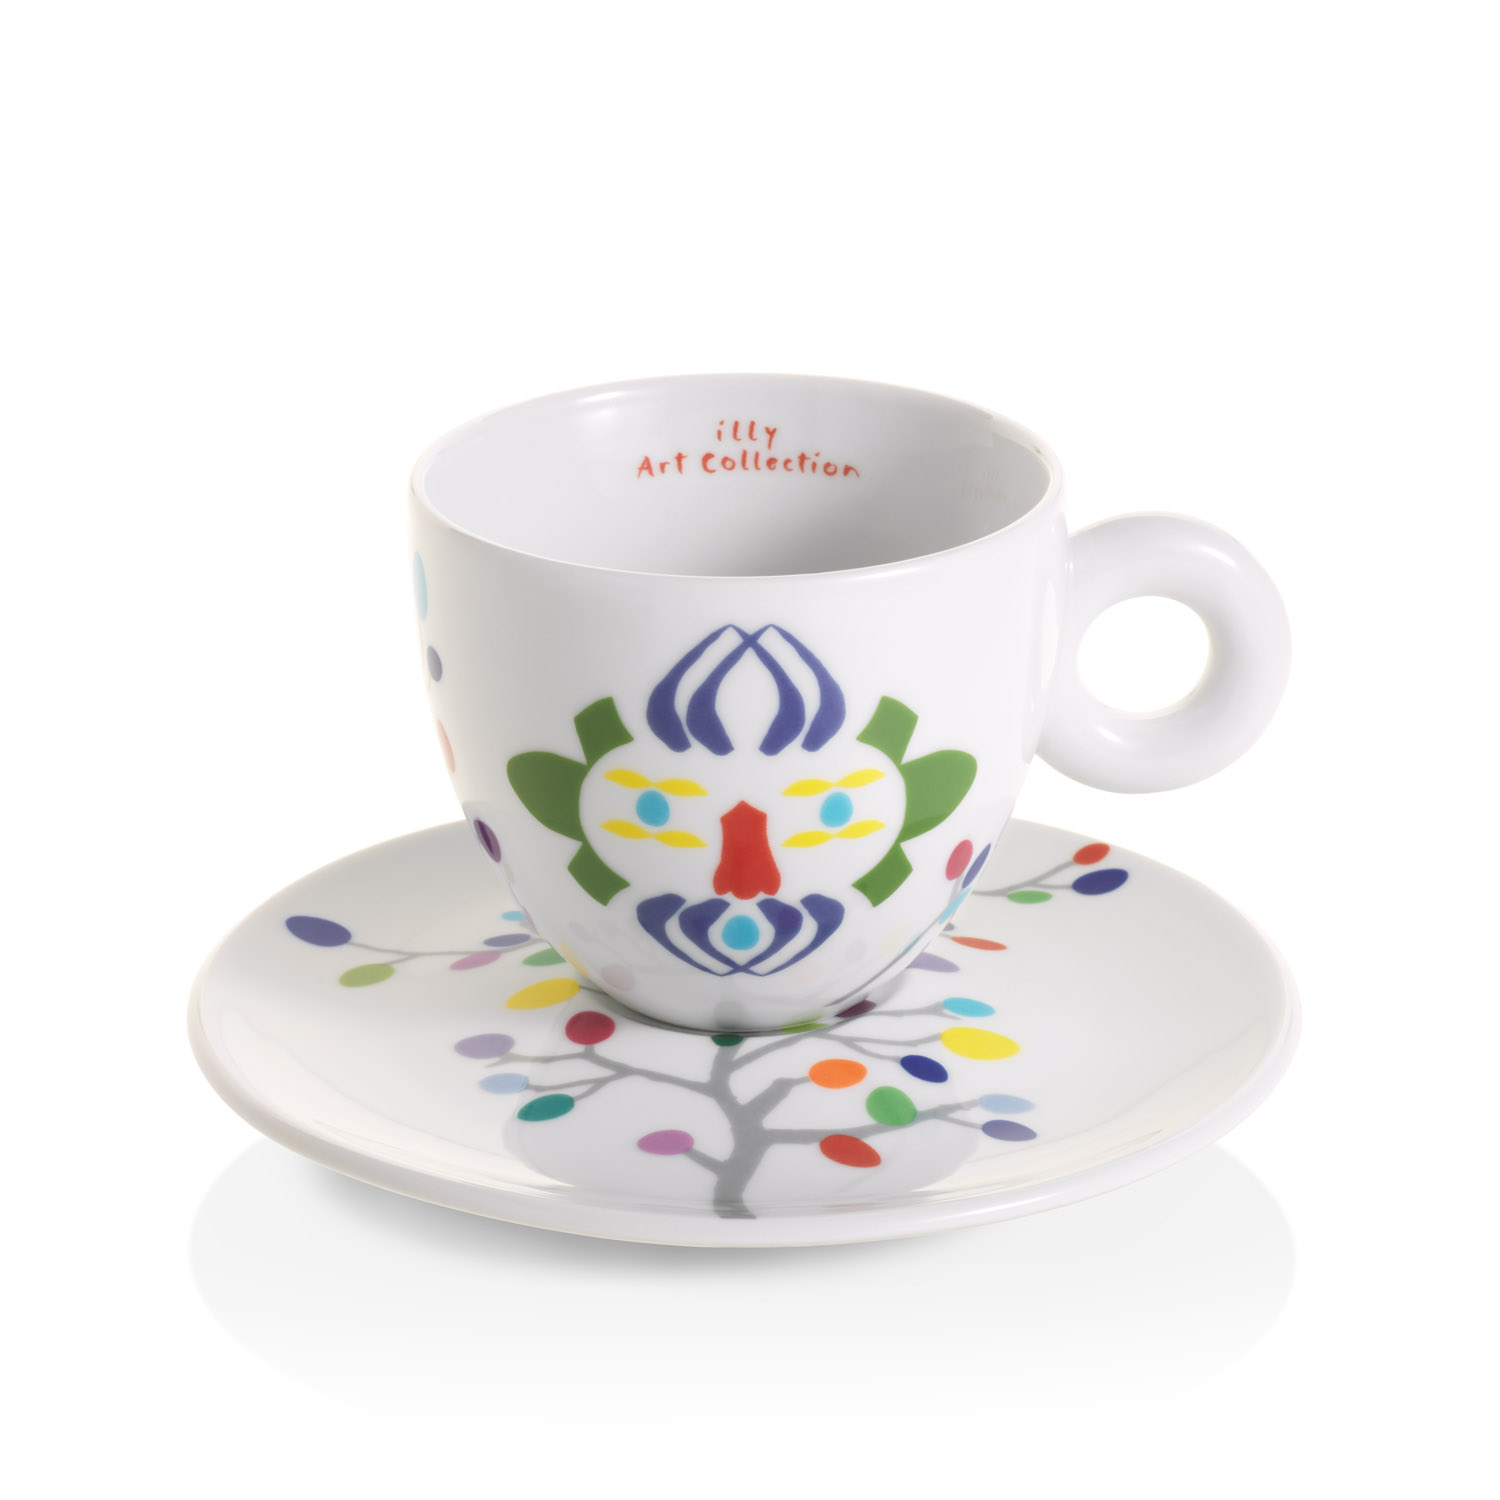 illy Art Collection PASCALE MARTHINE TAYOU Σετ Δώρου 2 Cappuccino Cups, Φλιτζάνια , 02-02-6089